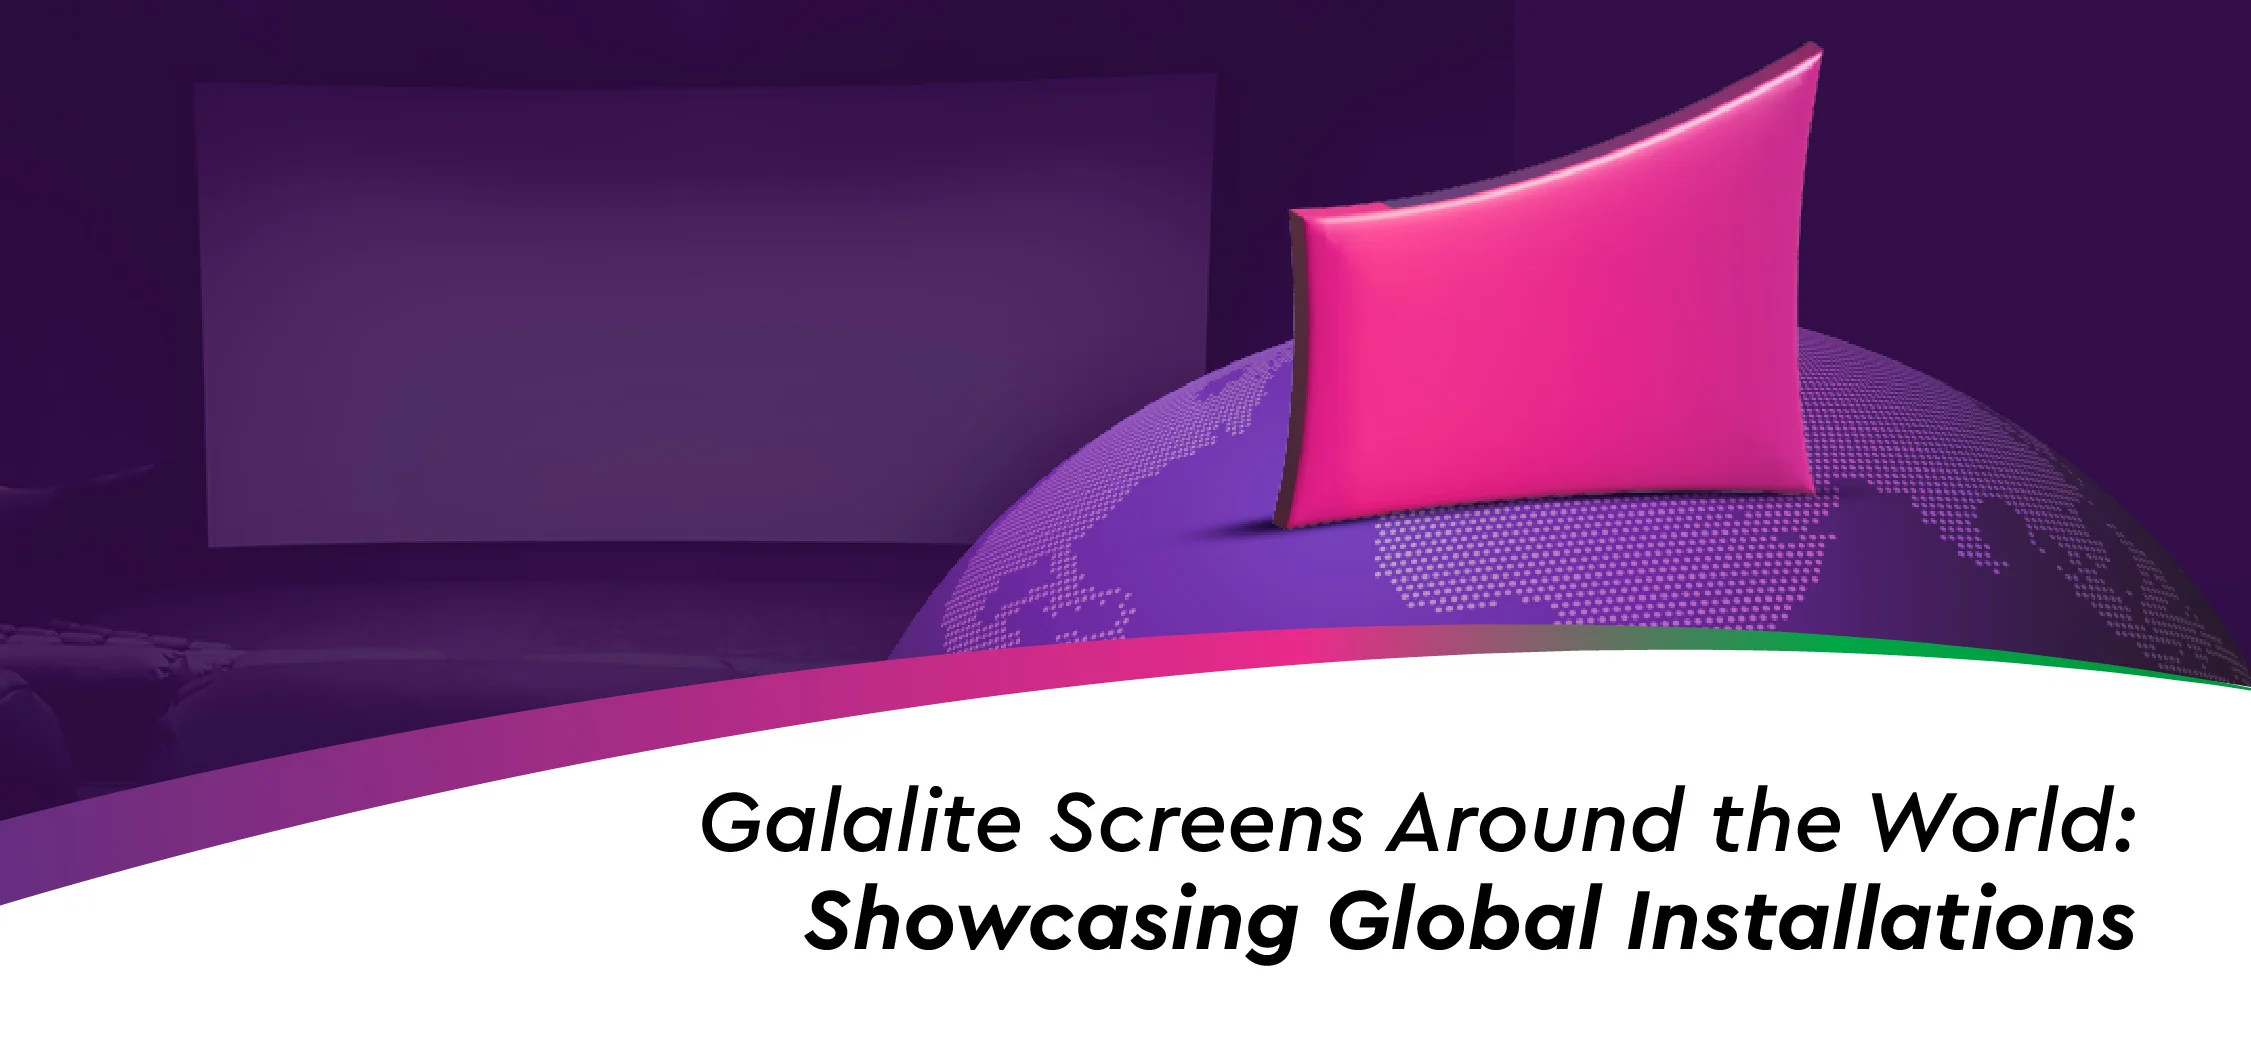 Global Installations of Screens